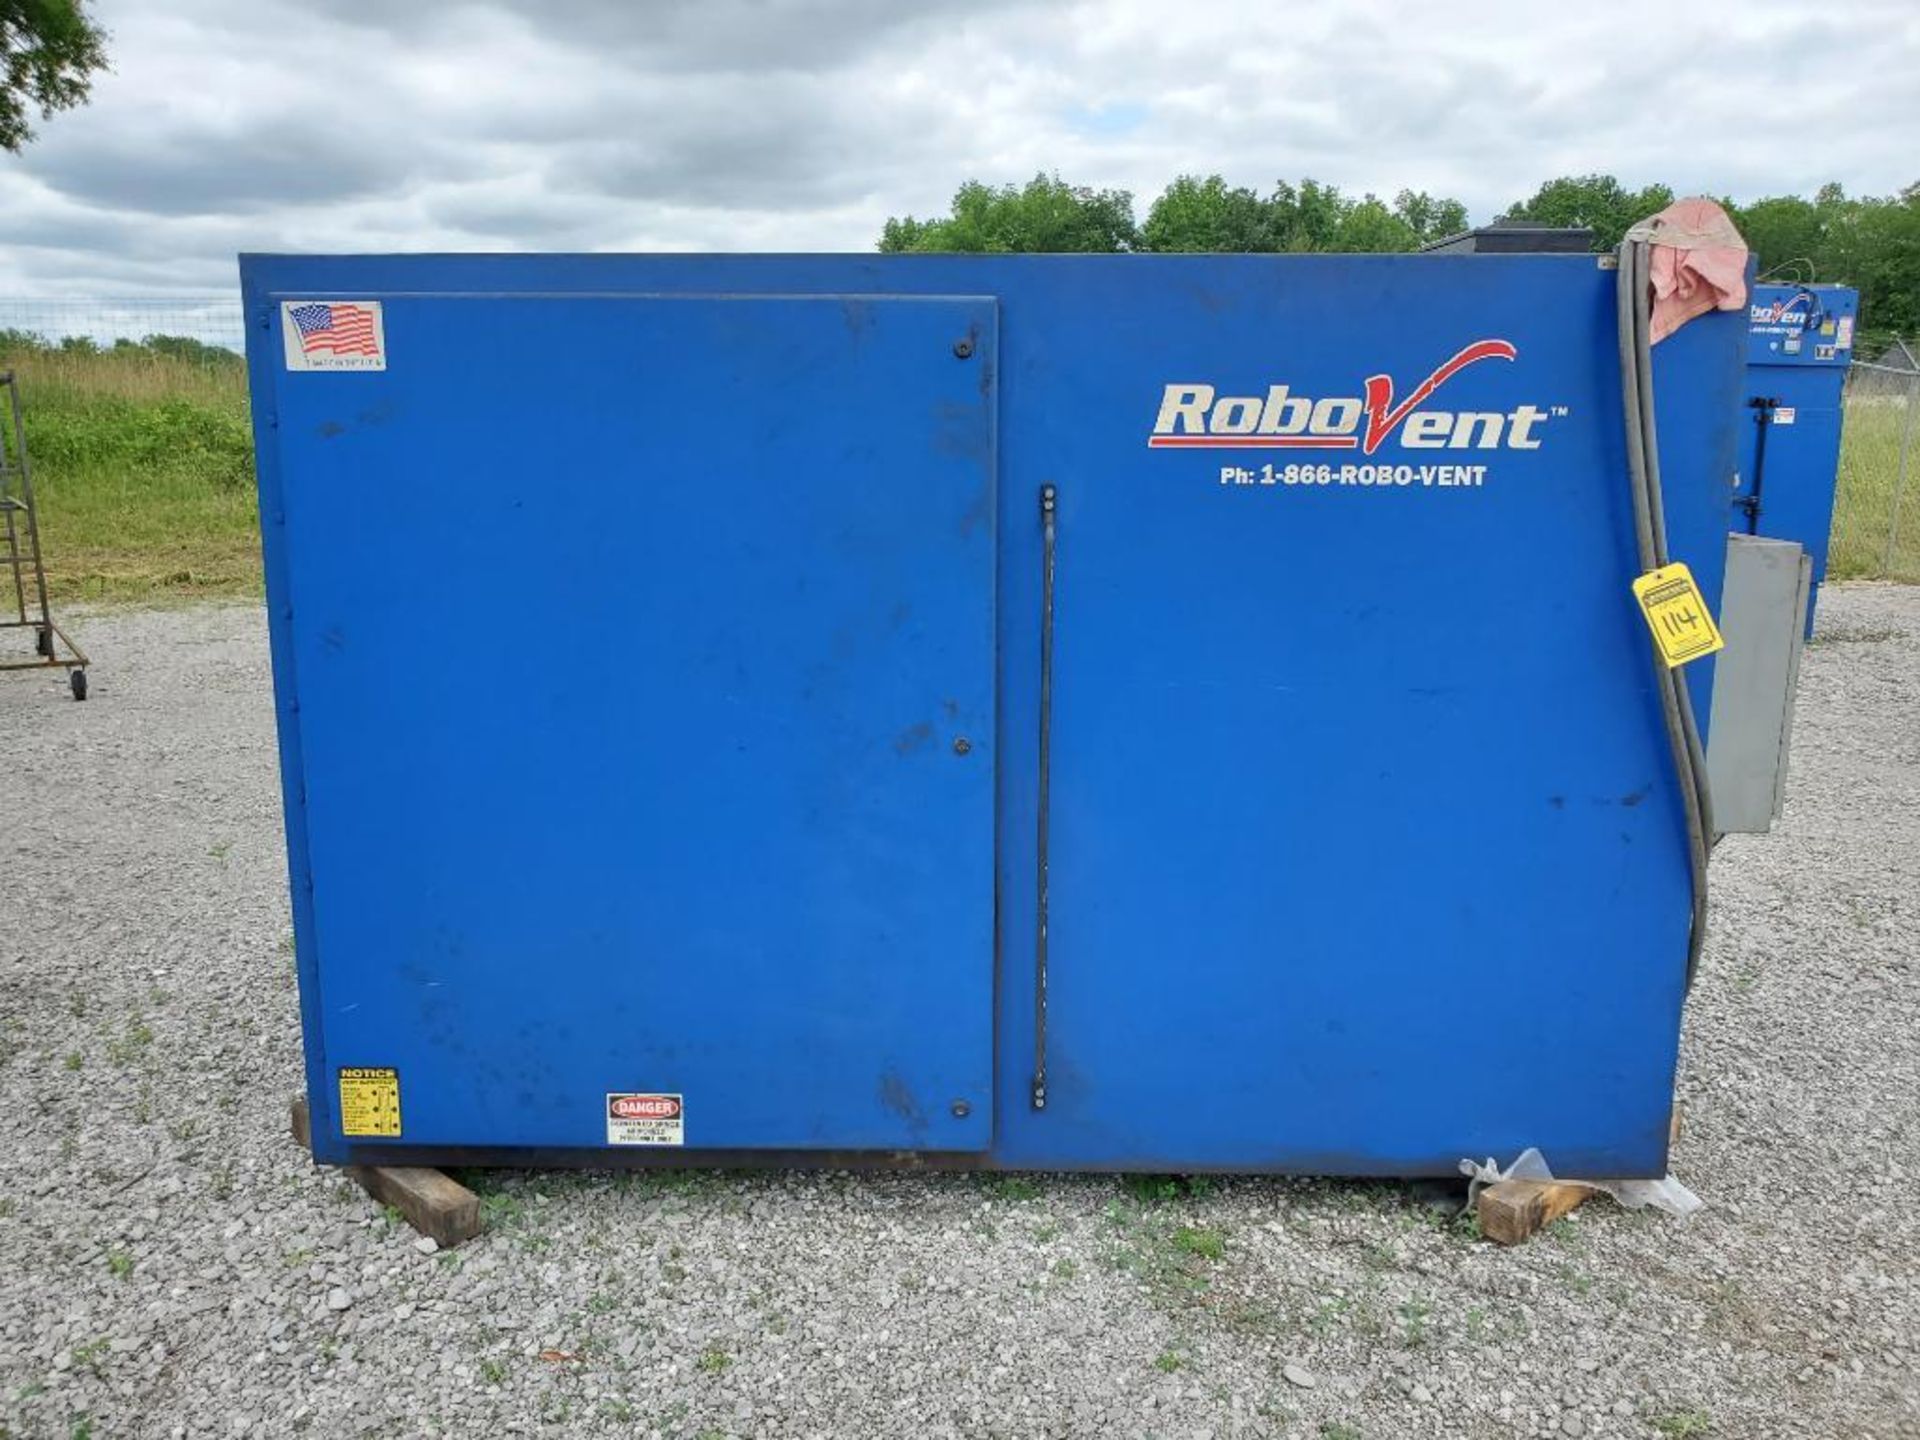 Great Lakes Air Robovent Dust Collector, Model DFS-8000-8, S/N 19760, 15 HP, 3 PH, 21 AMP, 460V